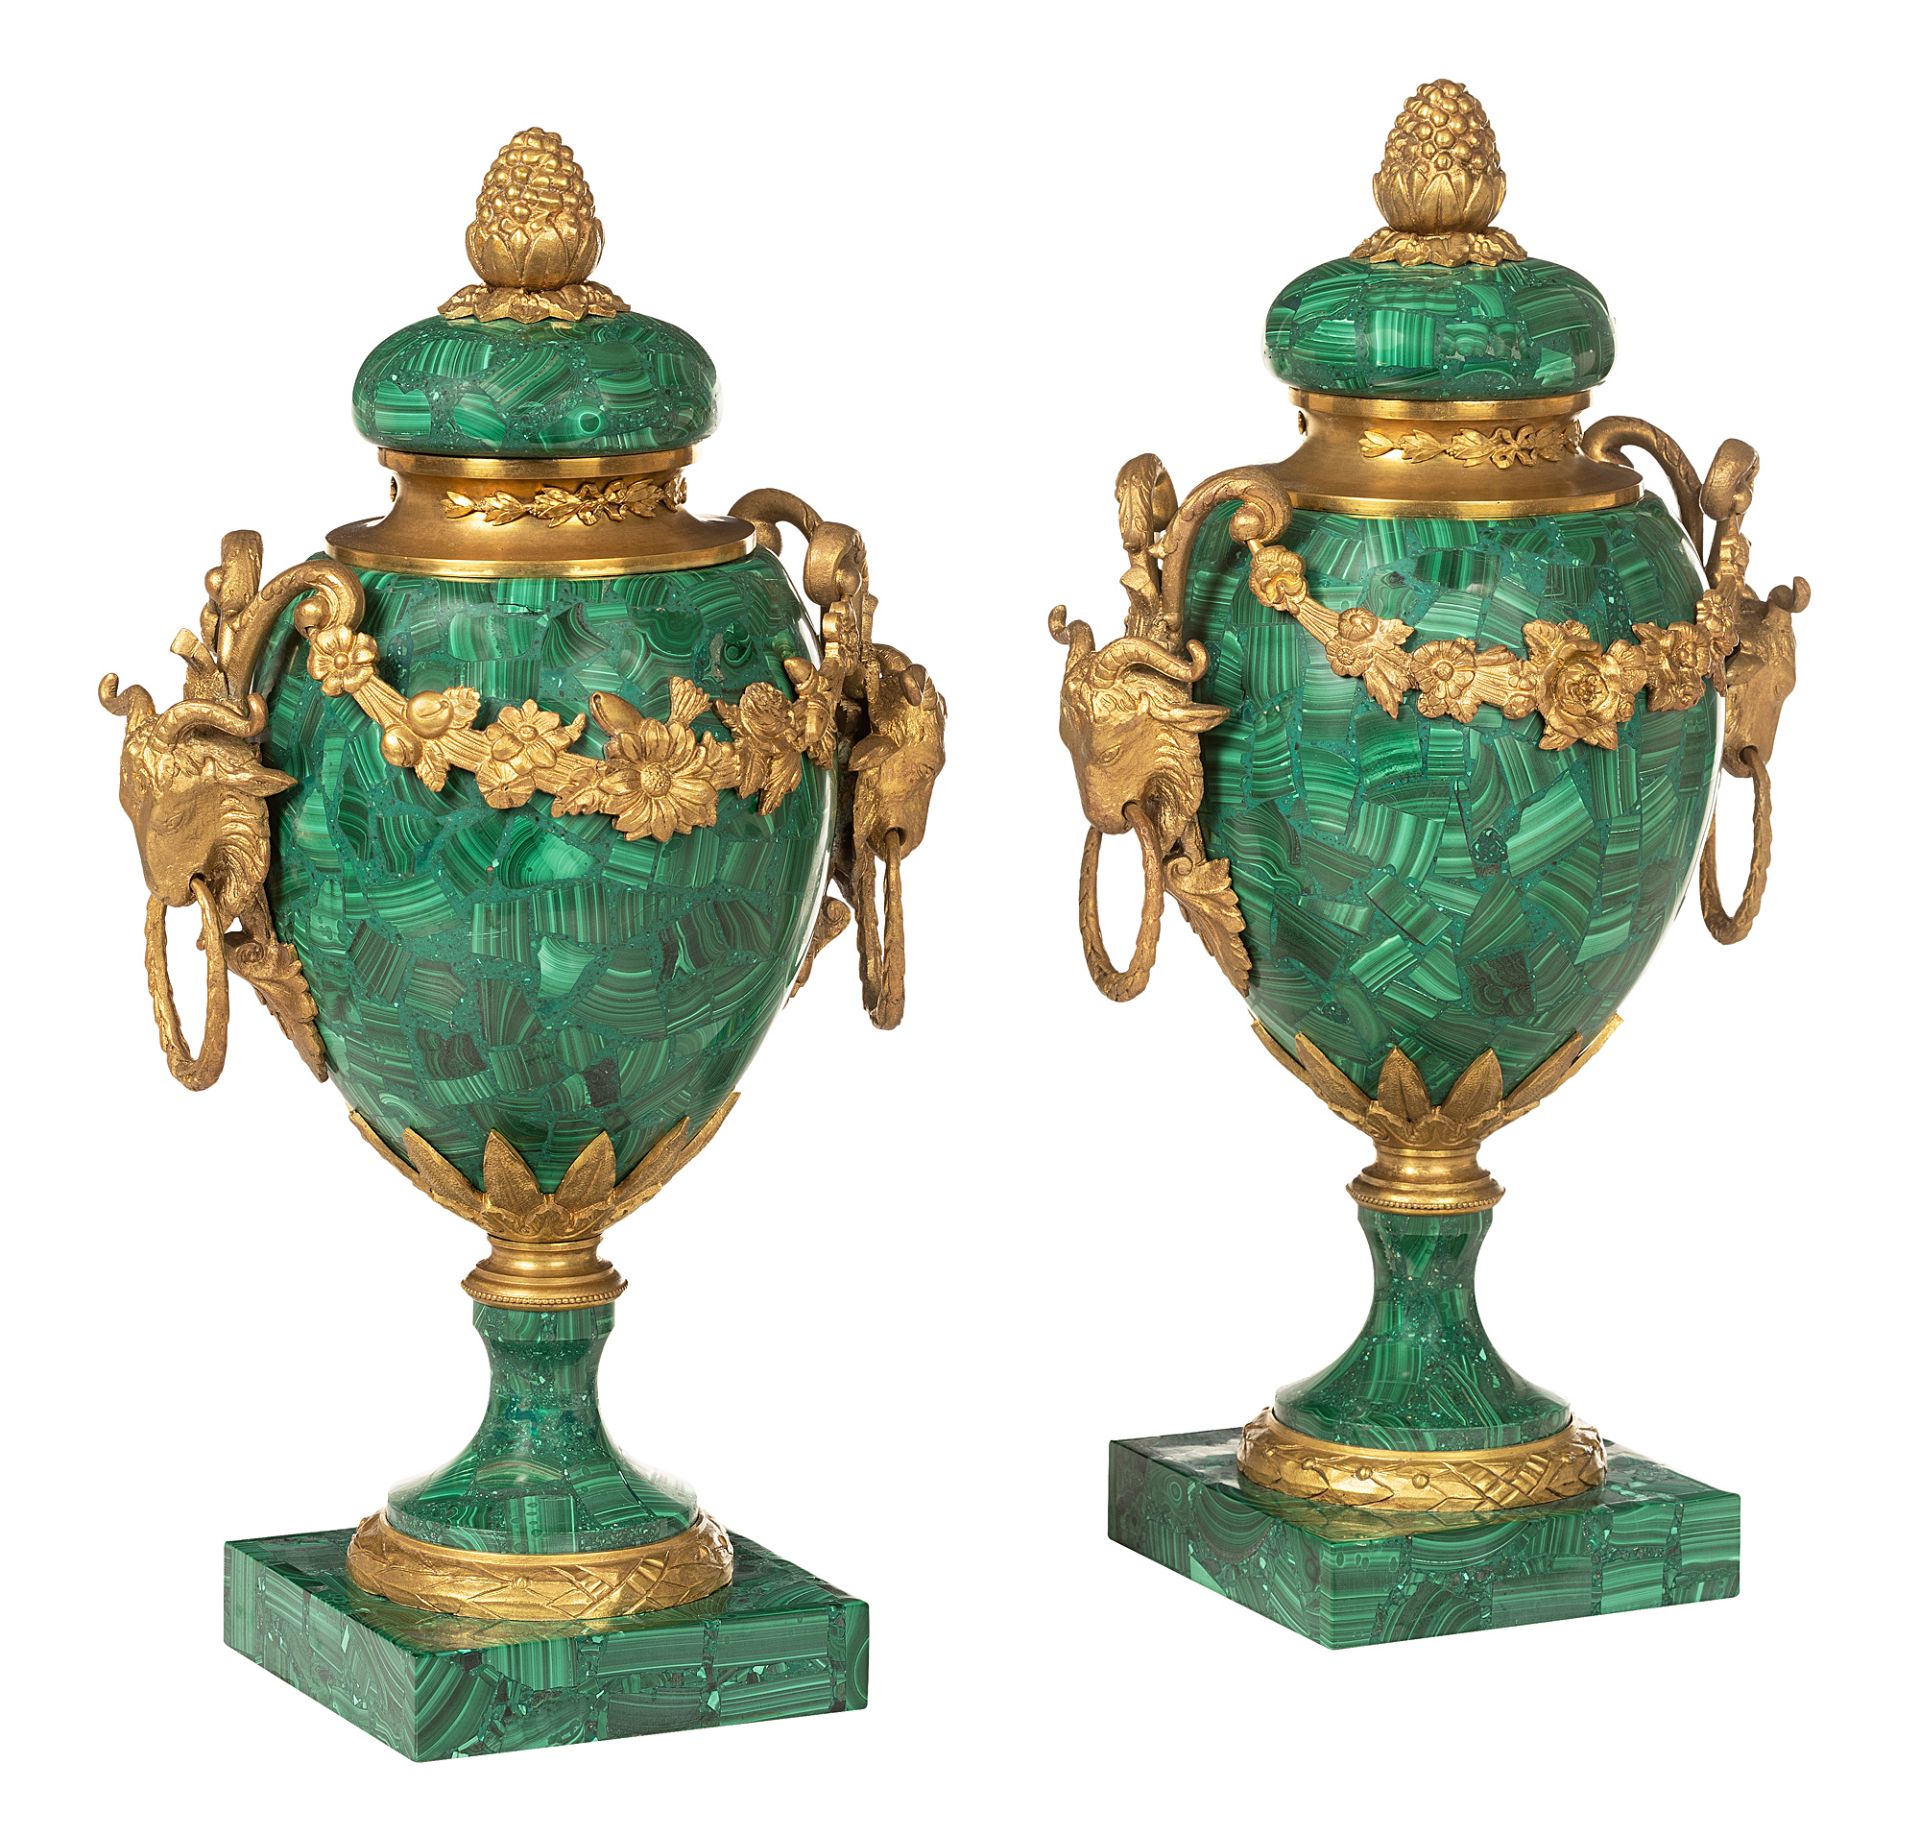 Pair of malachite vases in the style of French Early Classicism